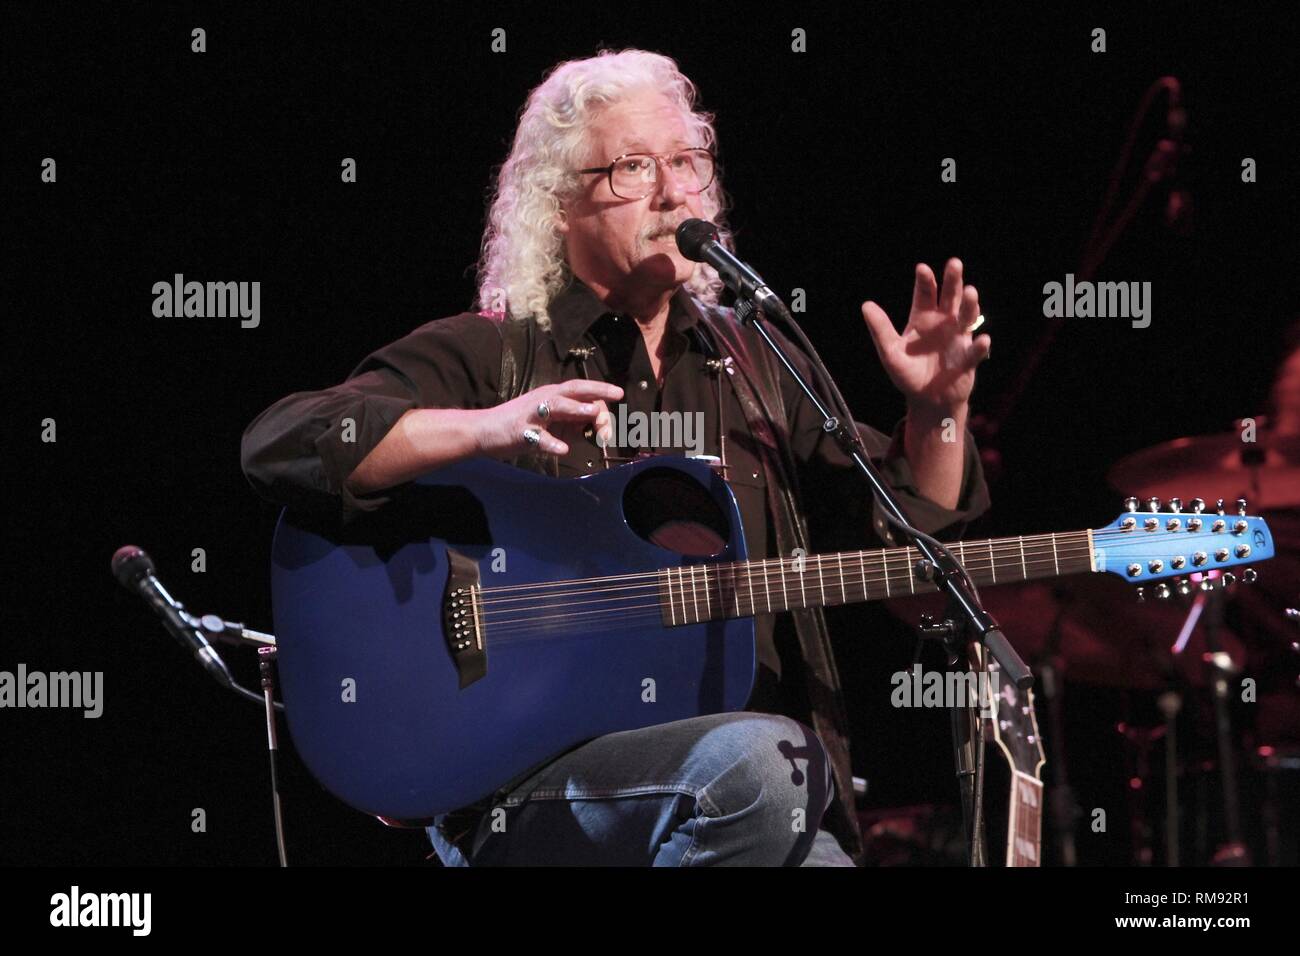 Singer, songwriter and guitarist Arlo Guthrie is shown performing on stage during a 'live' concert appearance. Stock Photo